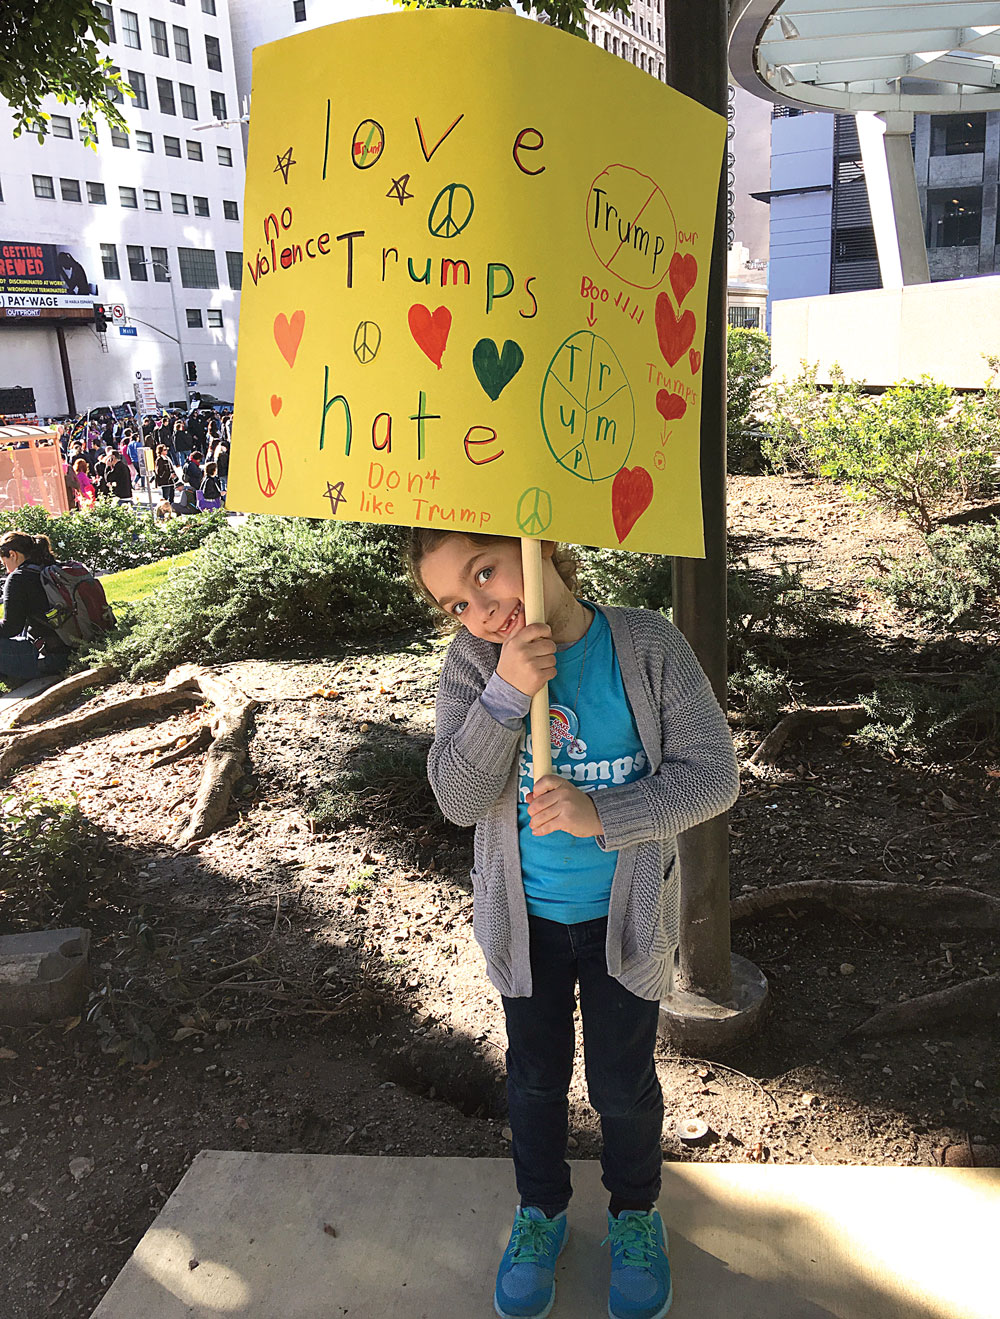 Maisy Myers, 7, of Porter Ranch, was among the young participants hoisting their signs at the march. Photo by Beth Meyers